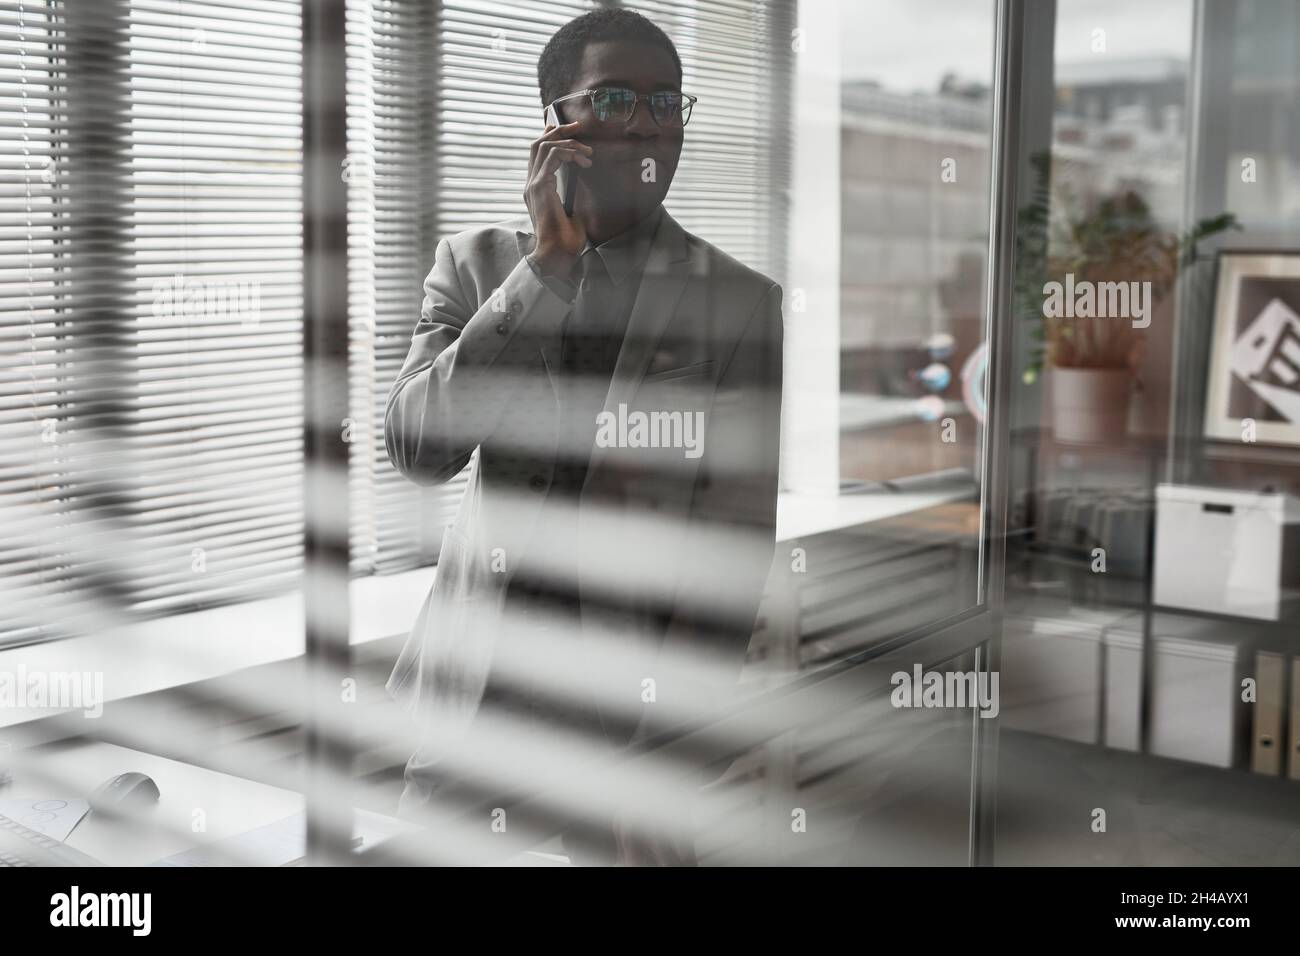 Waist up portrait of successful black businessman speaking by smartphone in office shot through glass, copy space Stock Photo